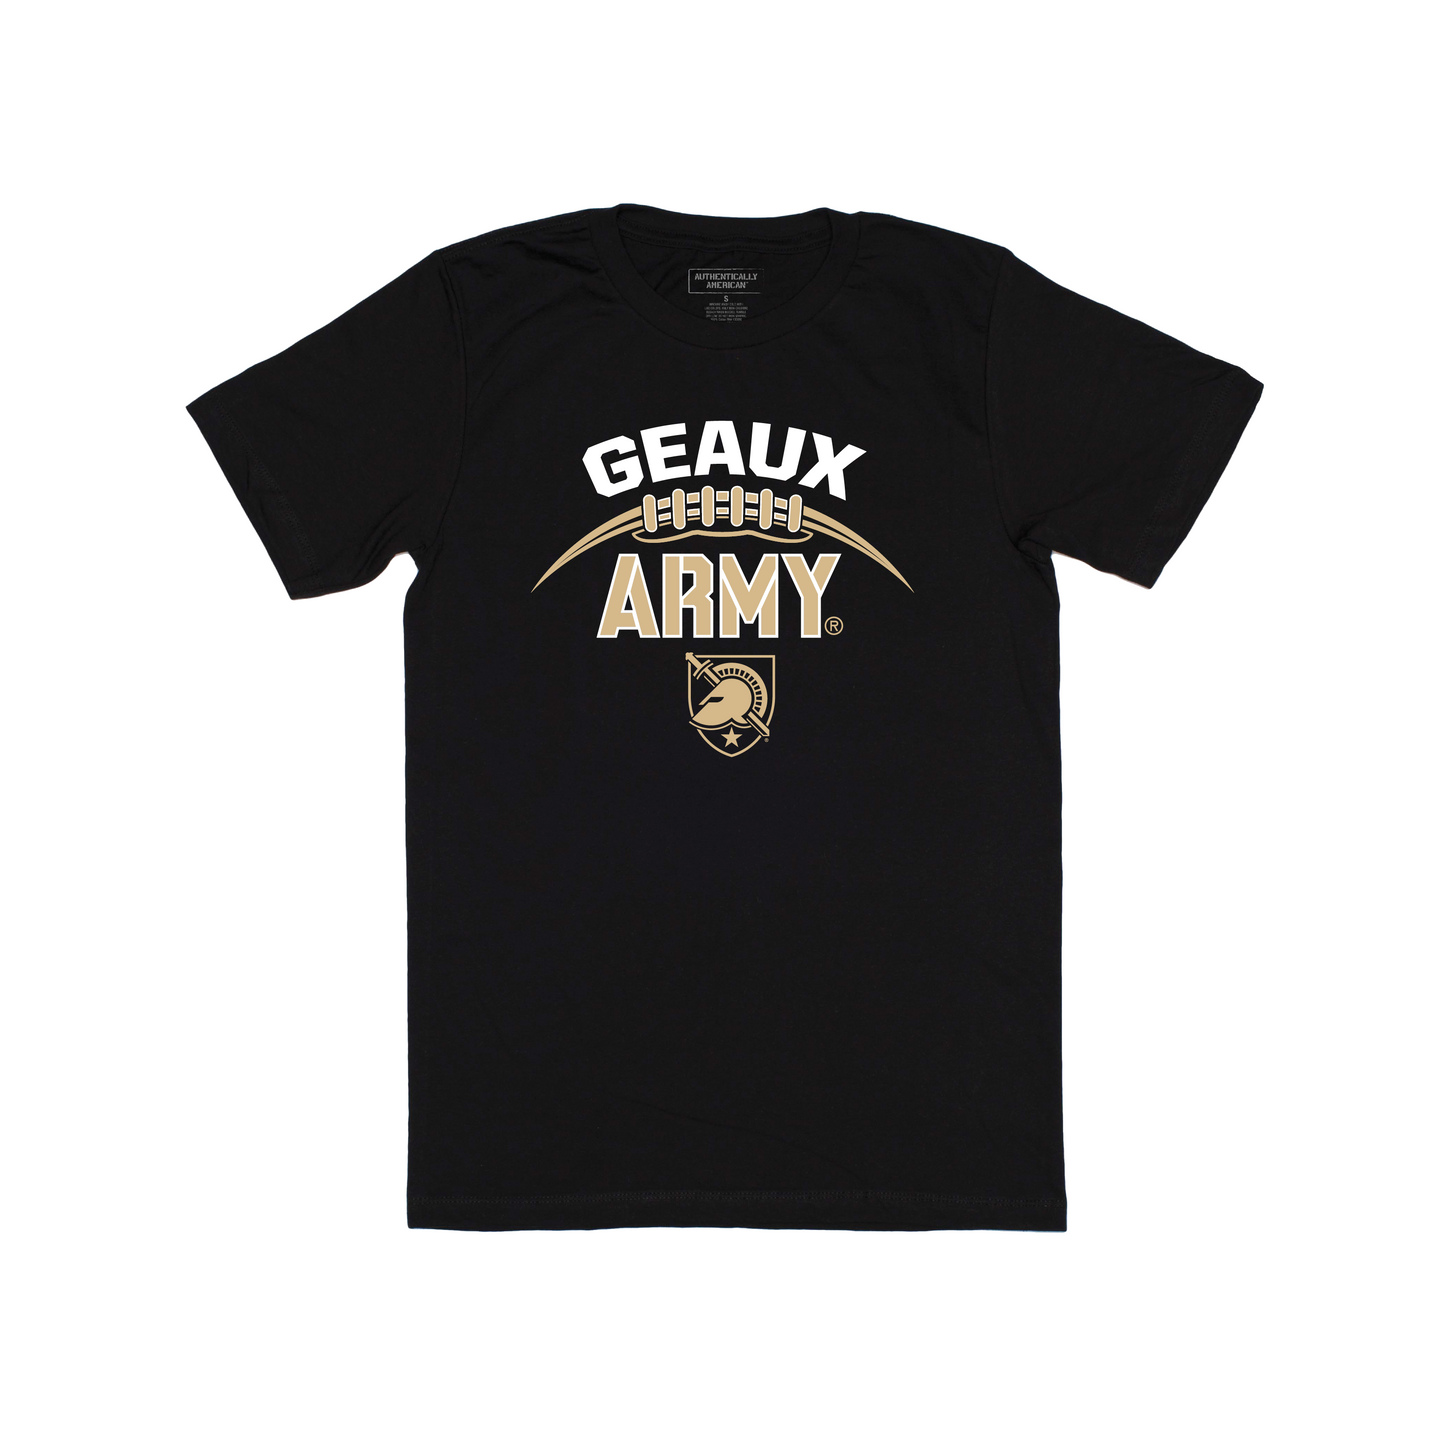 GEAUX Army Limited Edition Tee